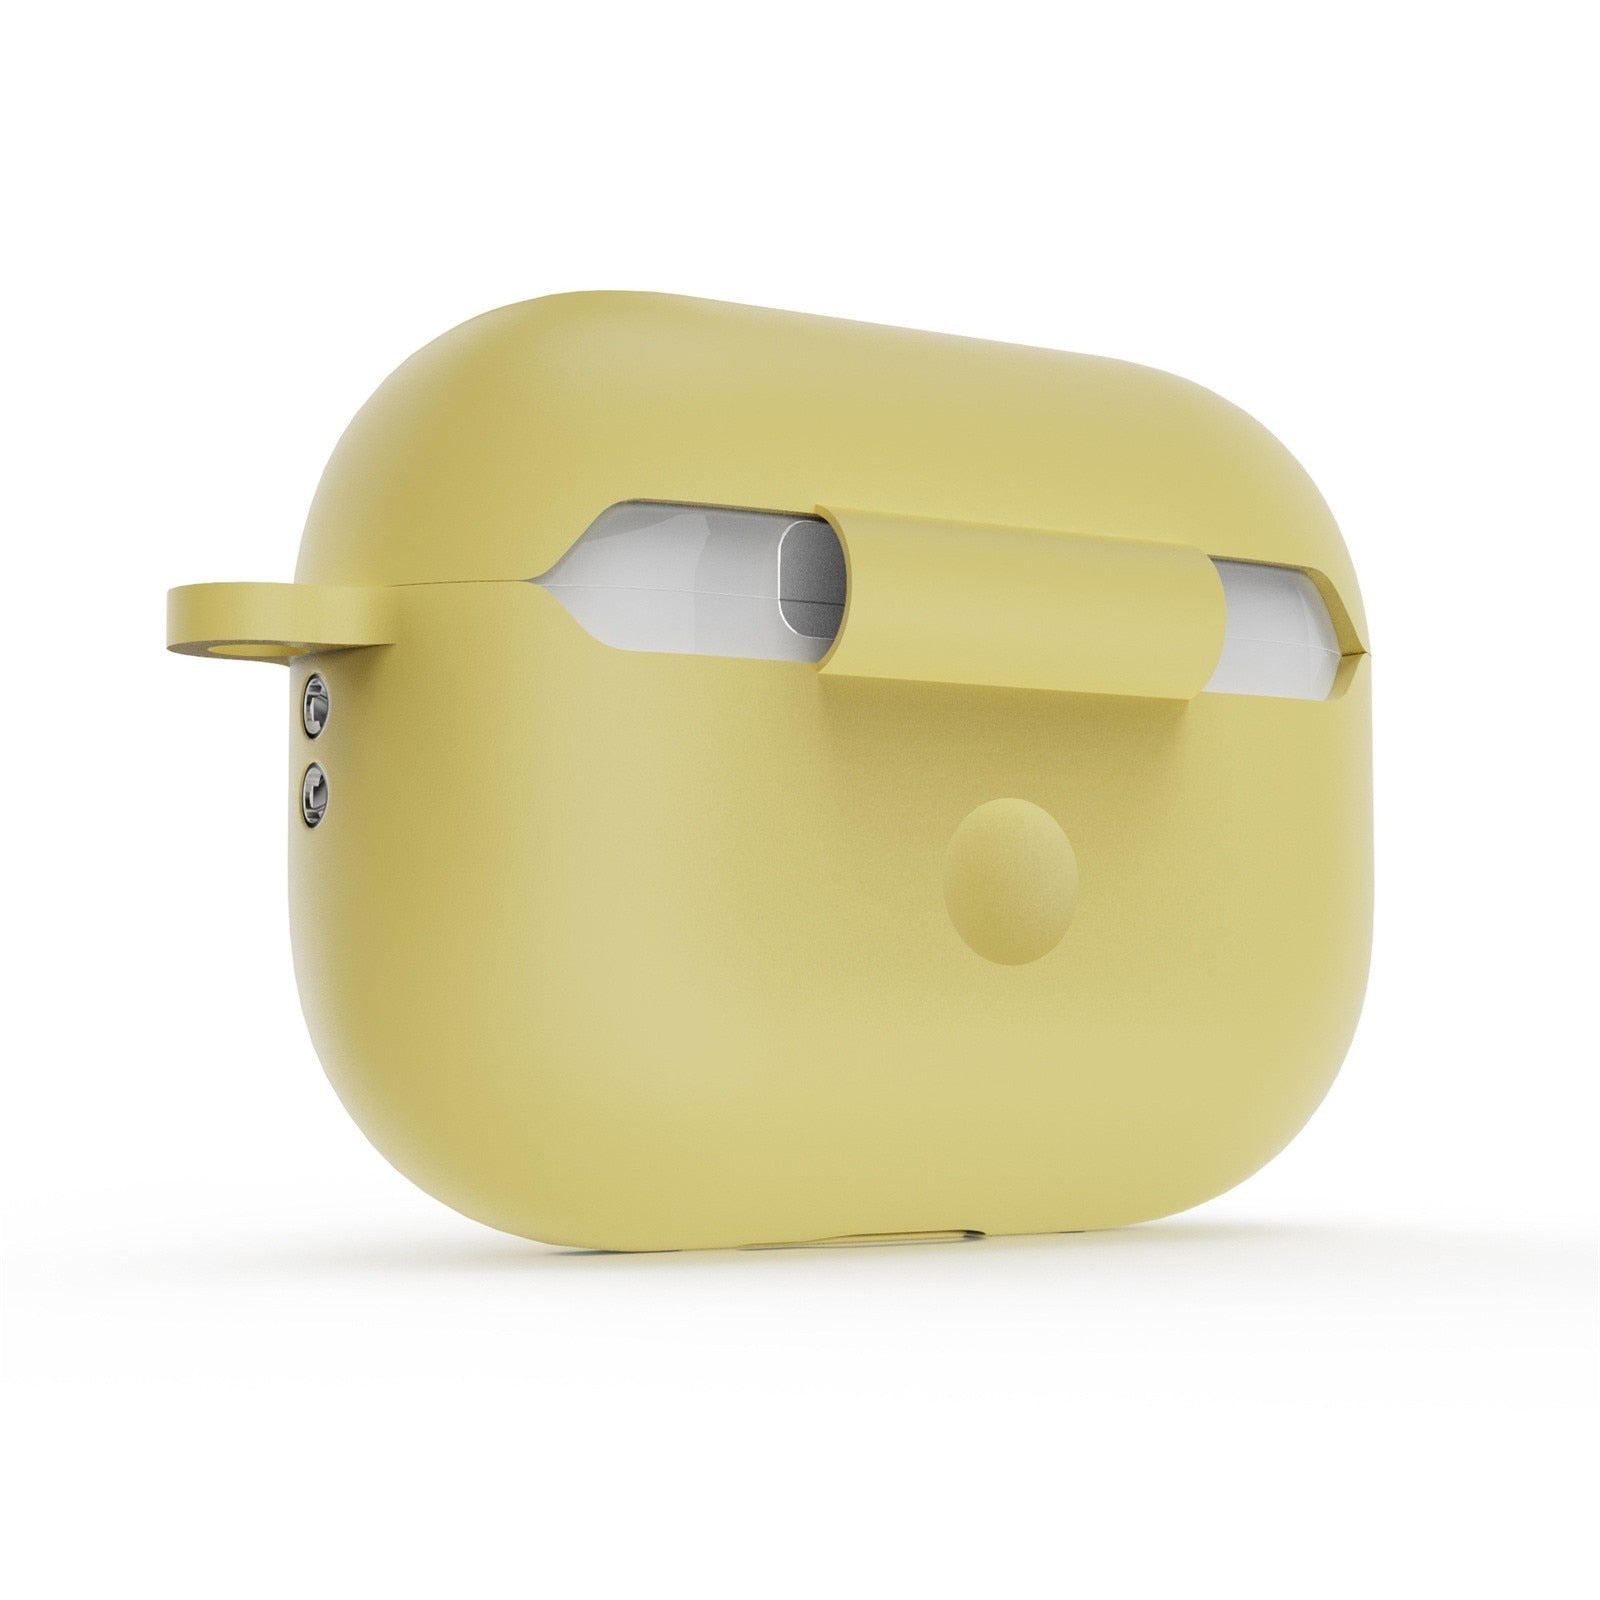 Pop-Up Silicone AirPods Case - Vox Megastore